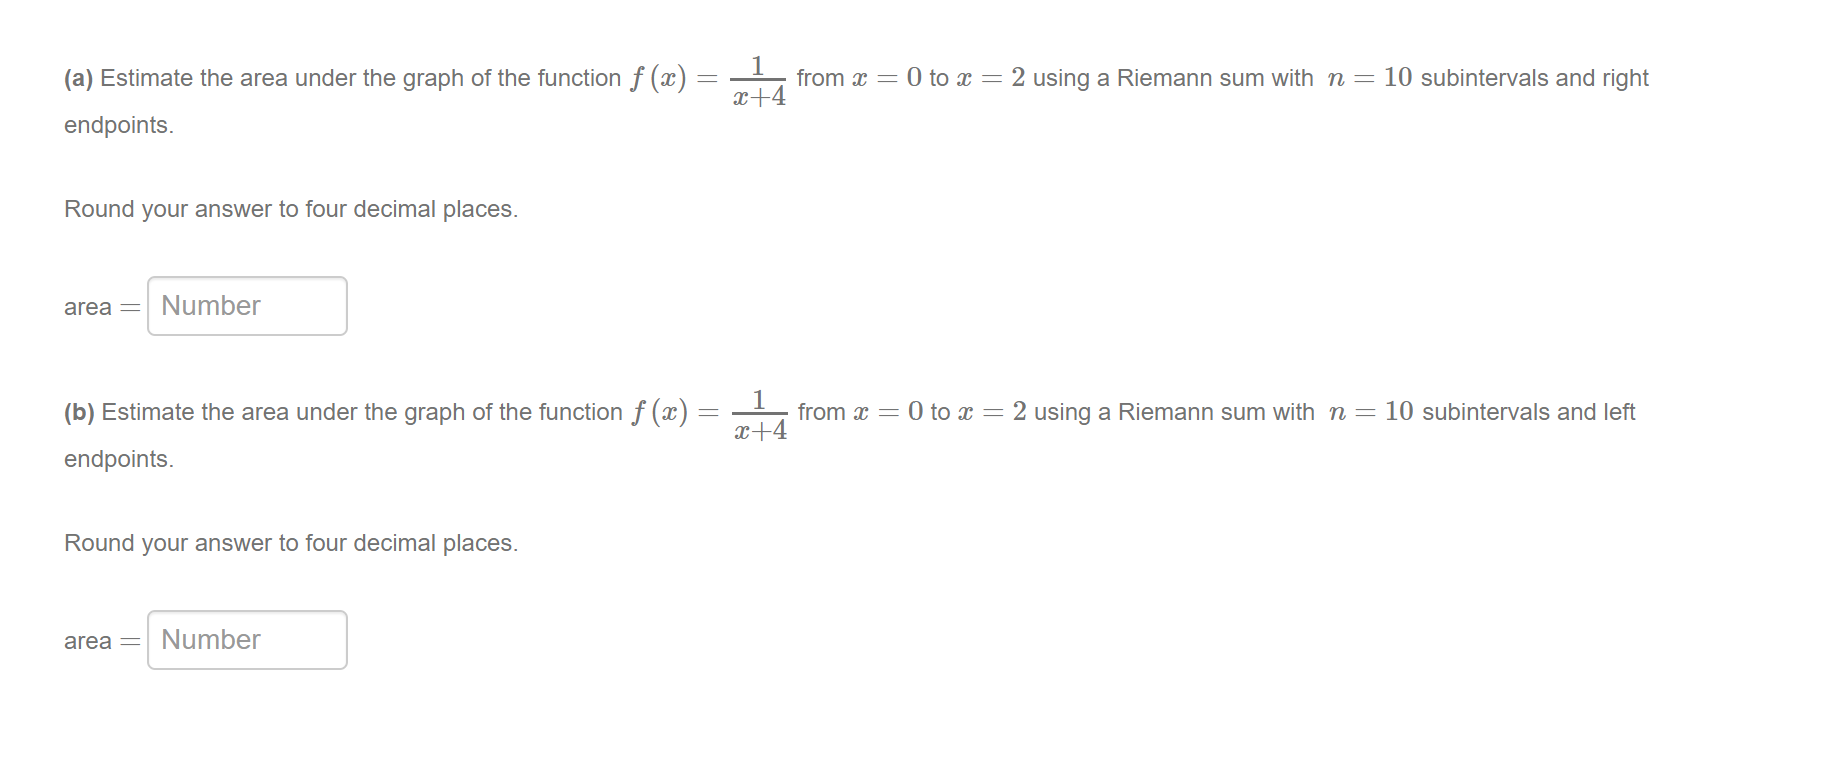 (a) Estimate the area under the graph of the function f (x)
from x = 0 to x = 2 using a Riemann sum with n = 10 subintervals and right
x+4
endpoints.
Round your answer to four decimal places.
area =
Number
1
from x = 0 to x = 2 using a Riemann sum with n = 10 subintervals and left
x+4
(b) Estimate the area under the graph of the function f (x)
endpoints.
Round your answer to four decimal places.
area =
Number
